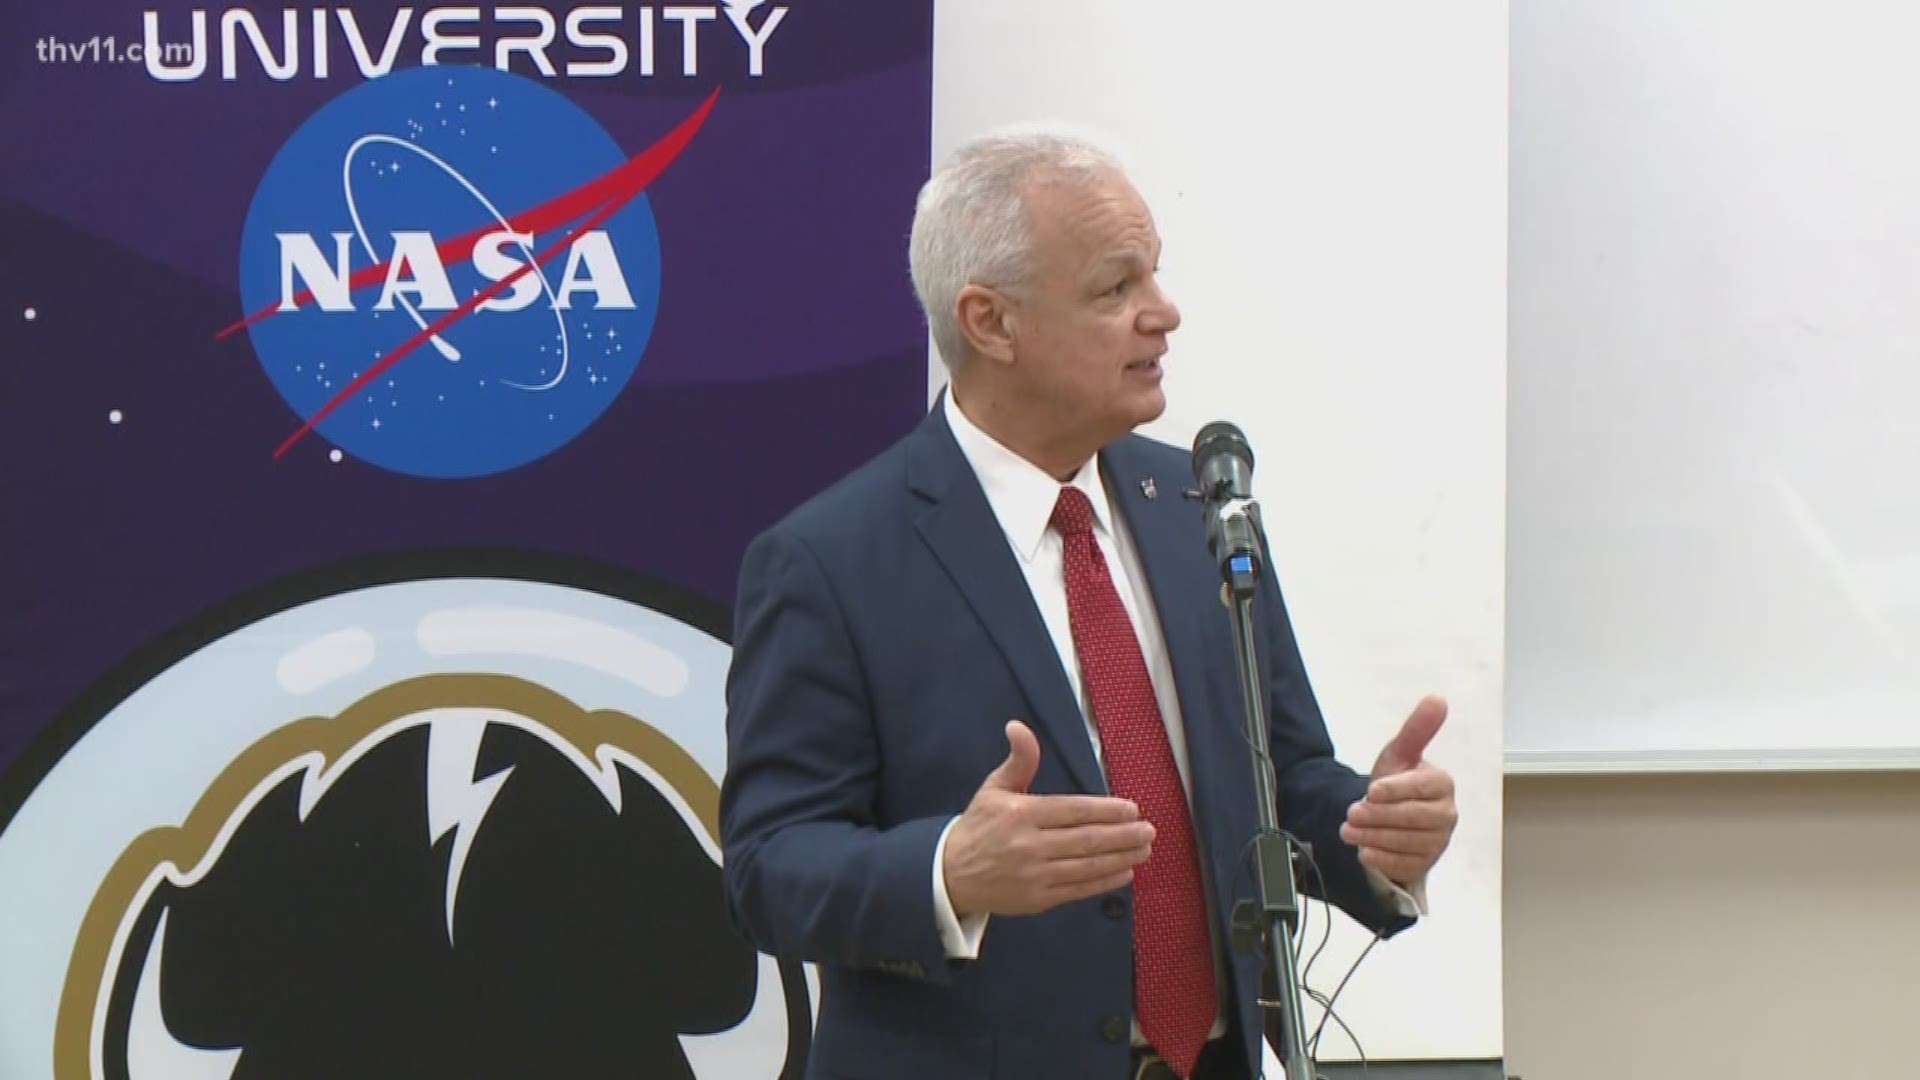 The Chief of NASA came to Arkansas to speak at Harding University today.